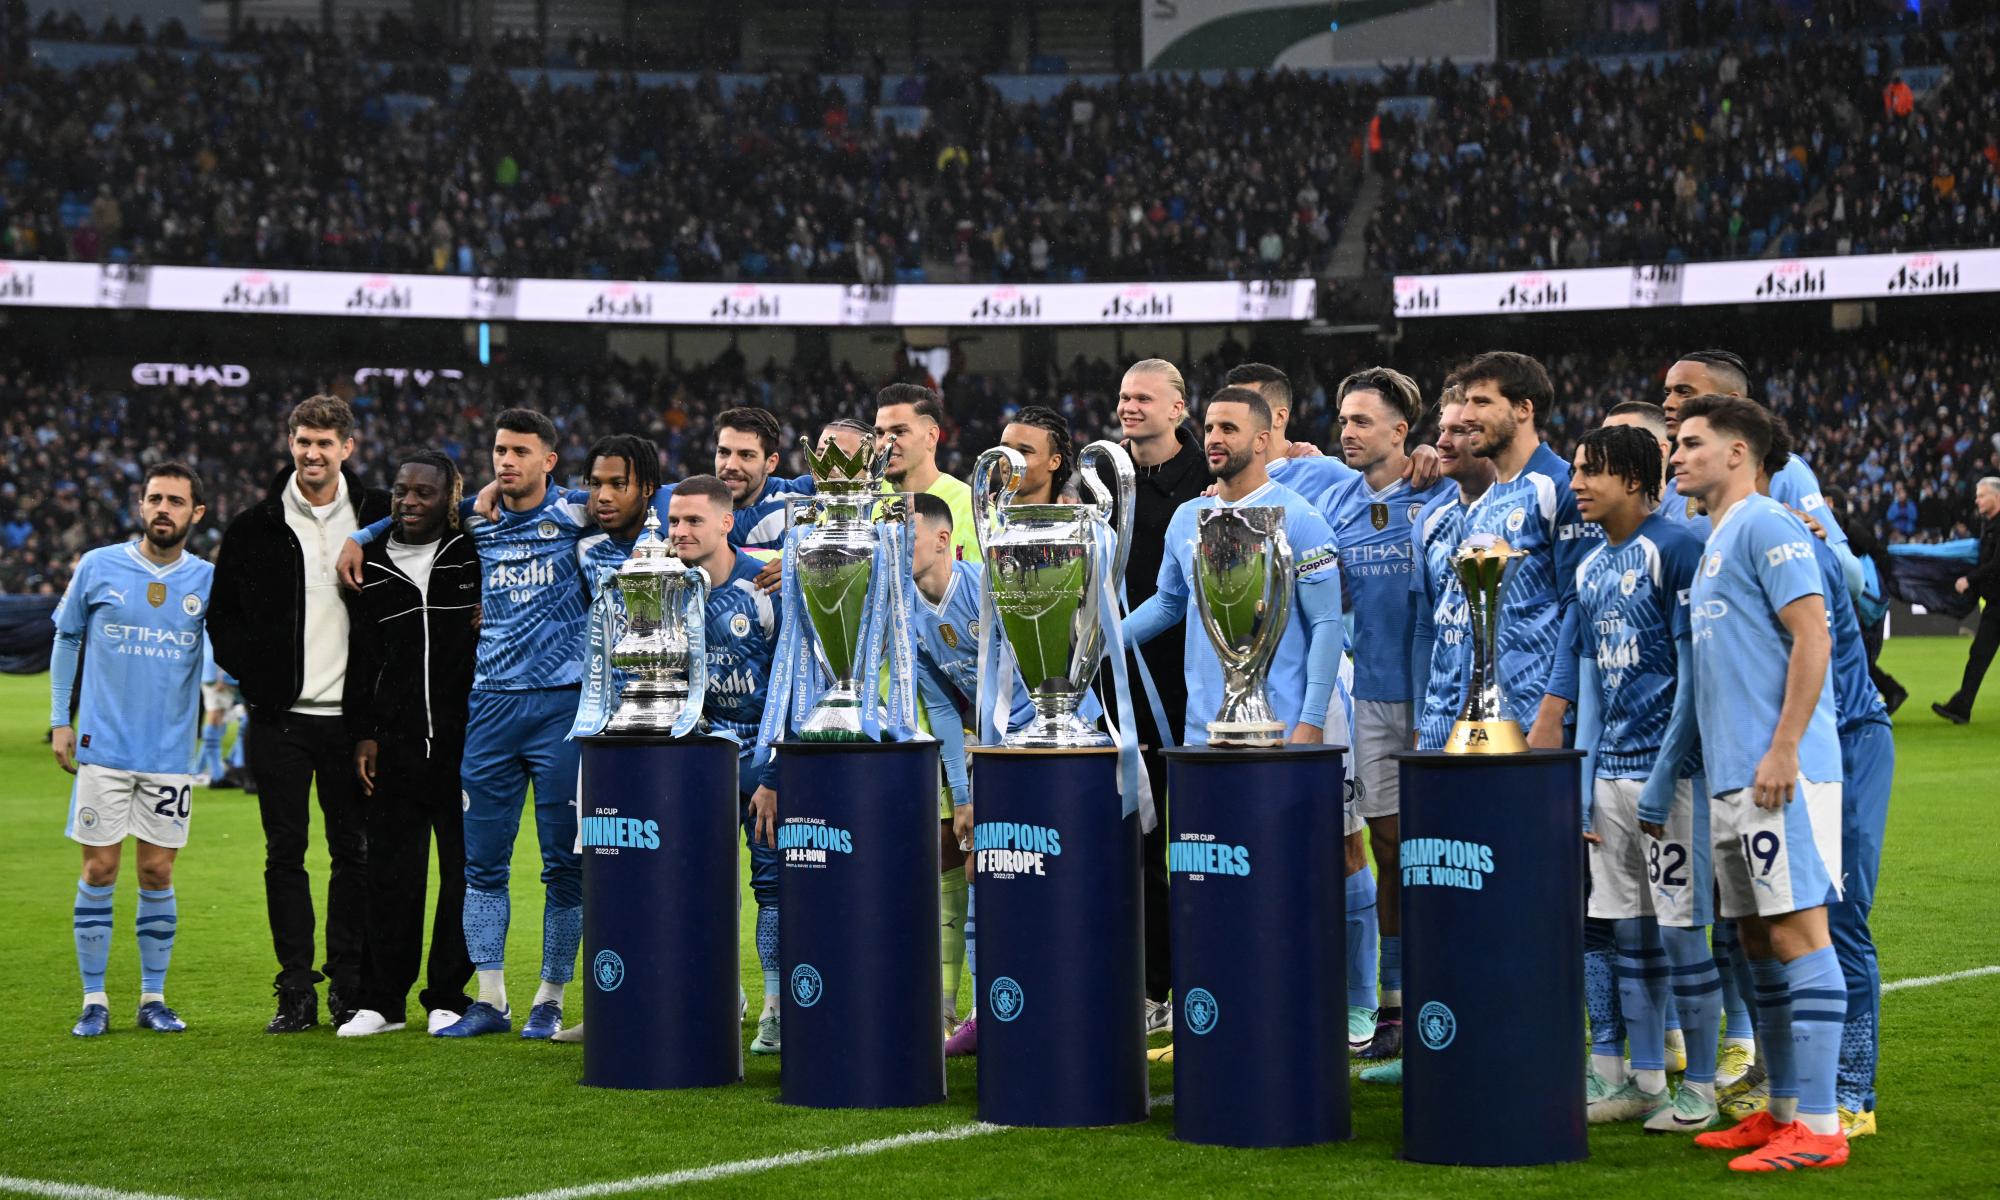 bad news for the title contenders: manchester city’s season starts here